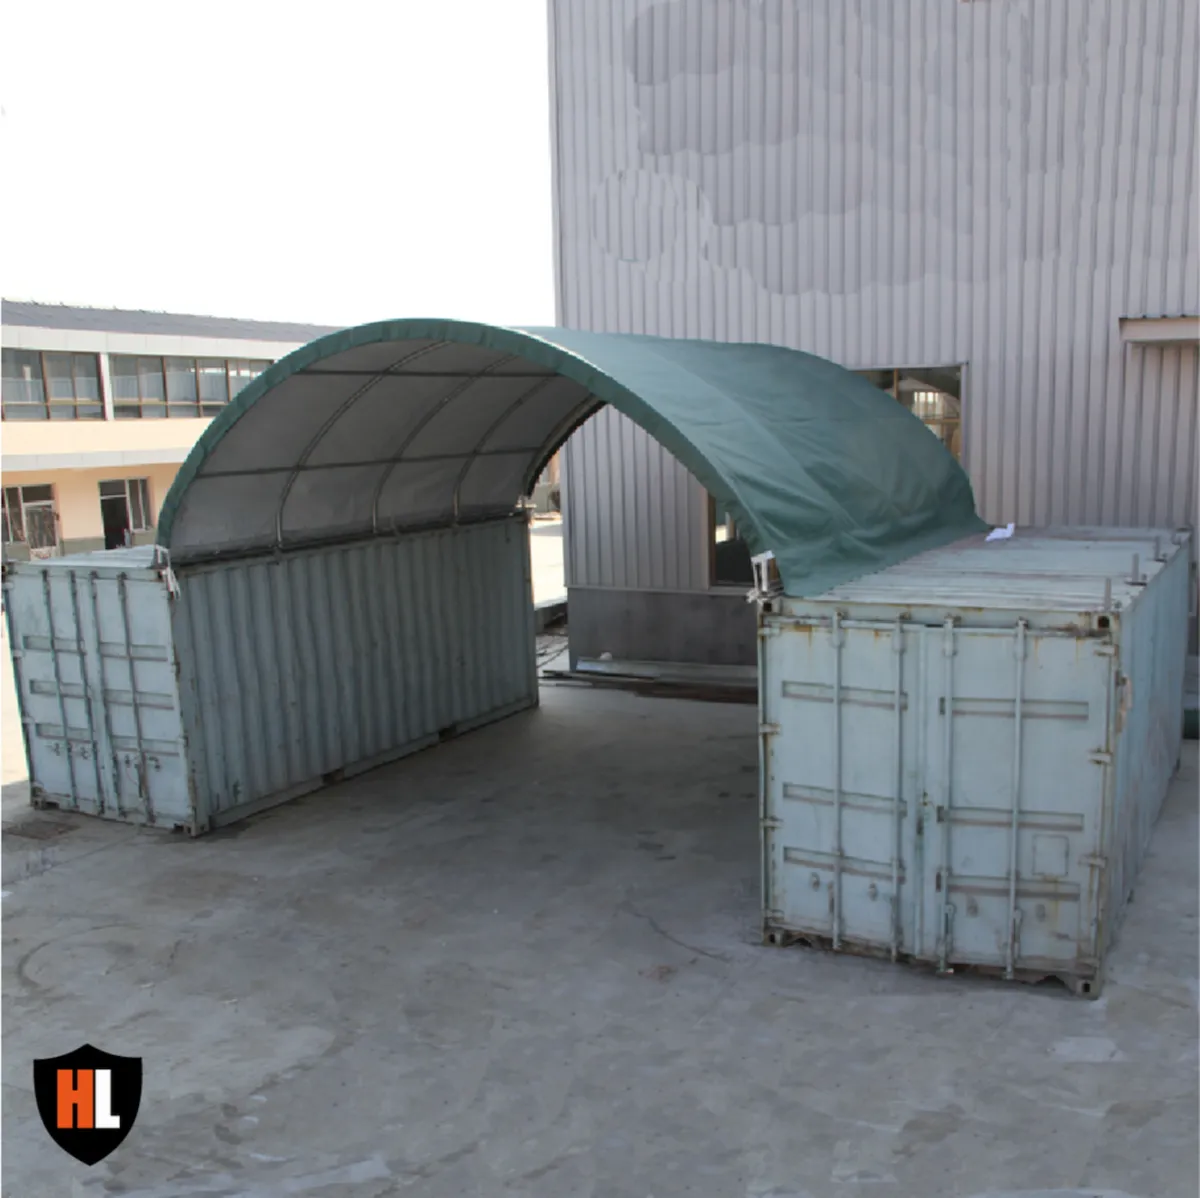 C2020 (Military Green) Container Shelter - Image 1